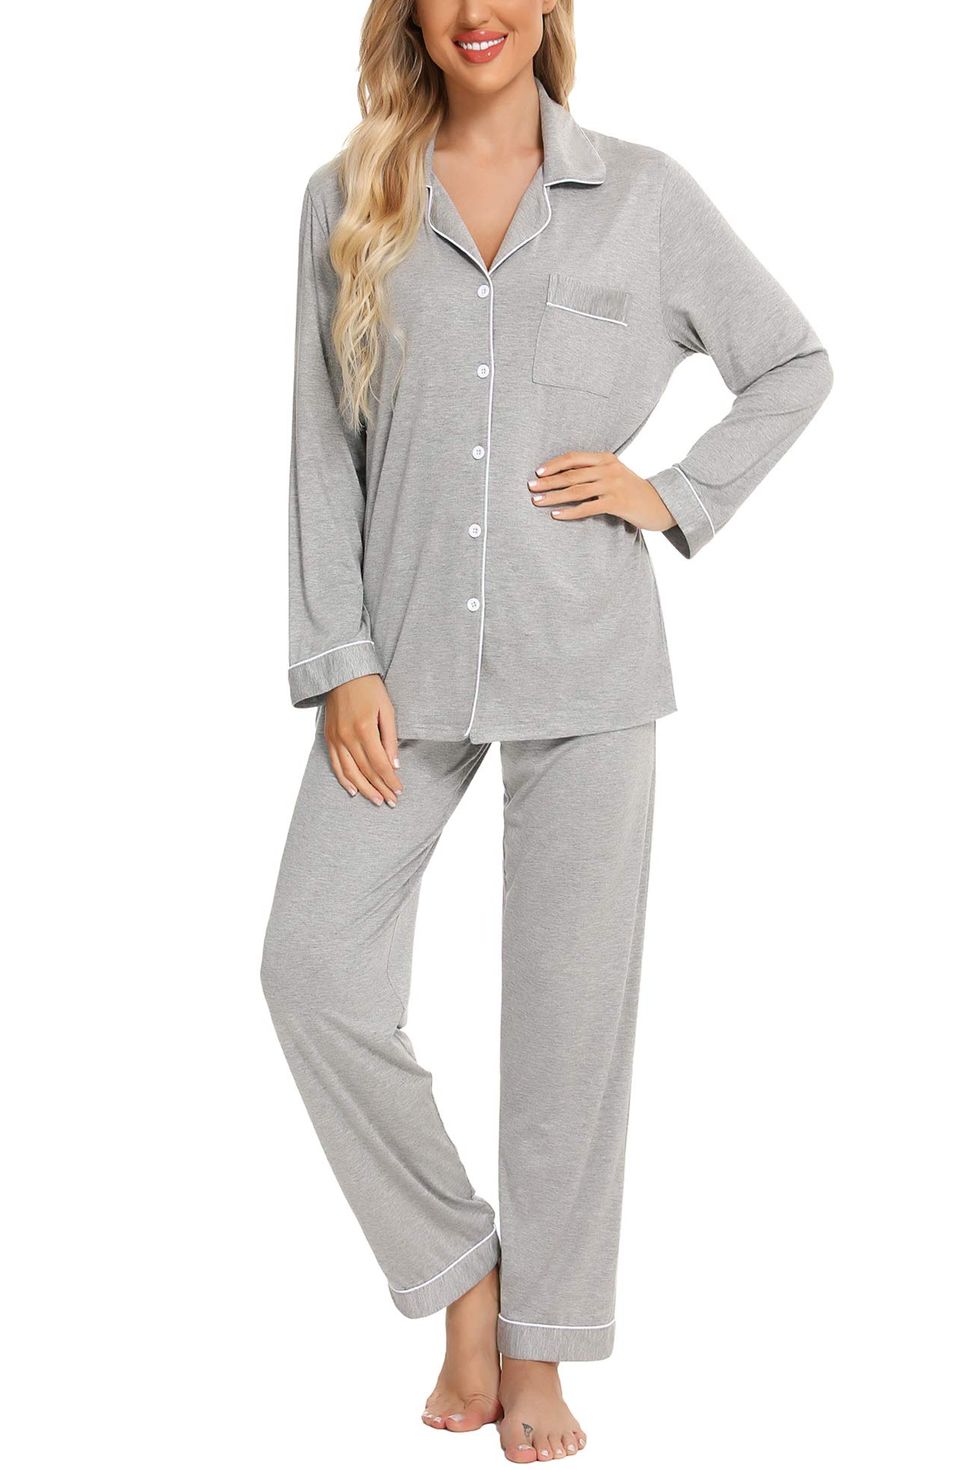 New Soma Women's Adult Cooling Pajamas Cool Nights XL Large Top